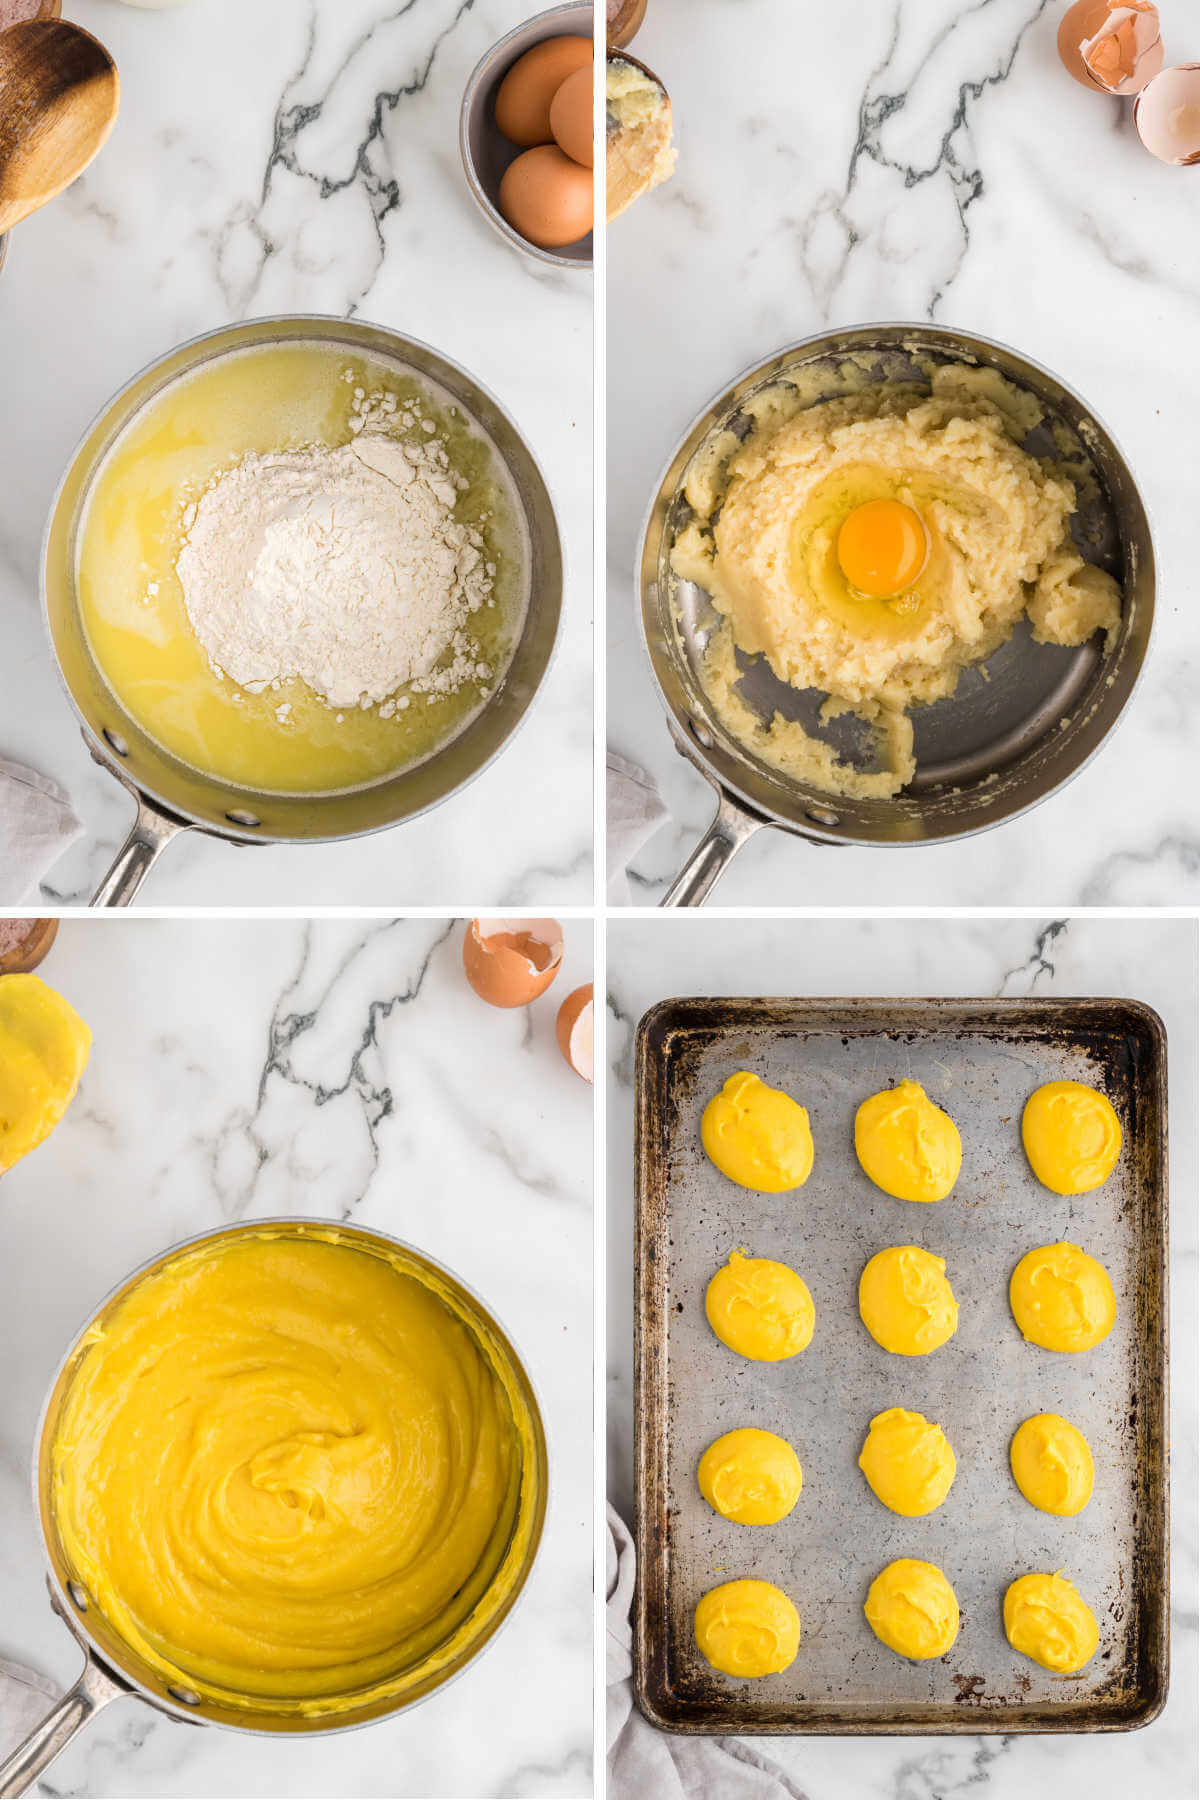 process steps for making pastry dough for cream puffs; cook the dough and drop by spoonfuls on a baking sheet.